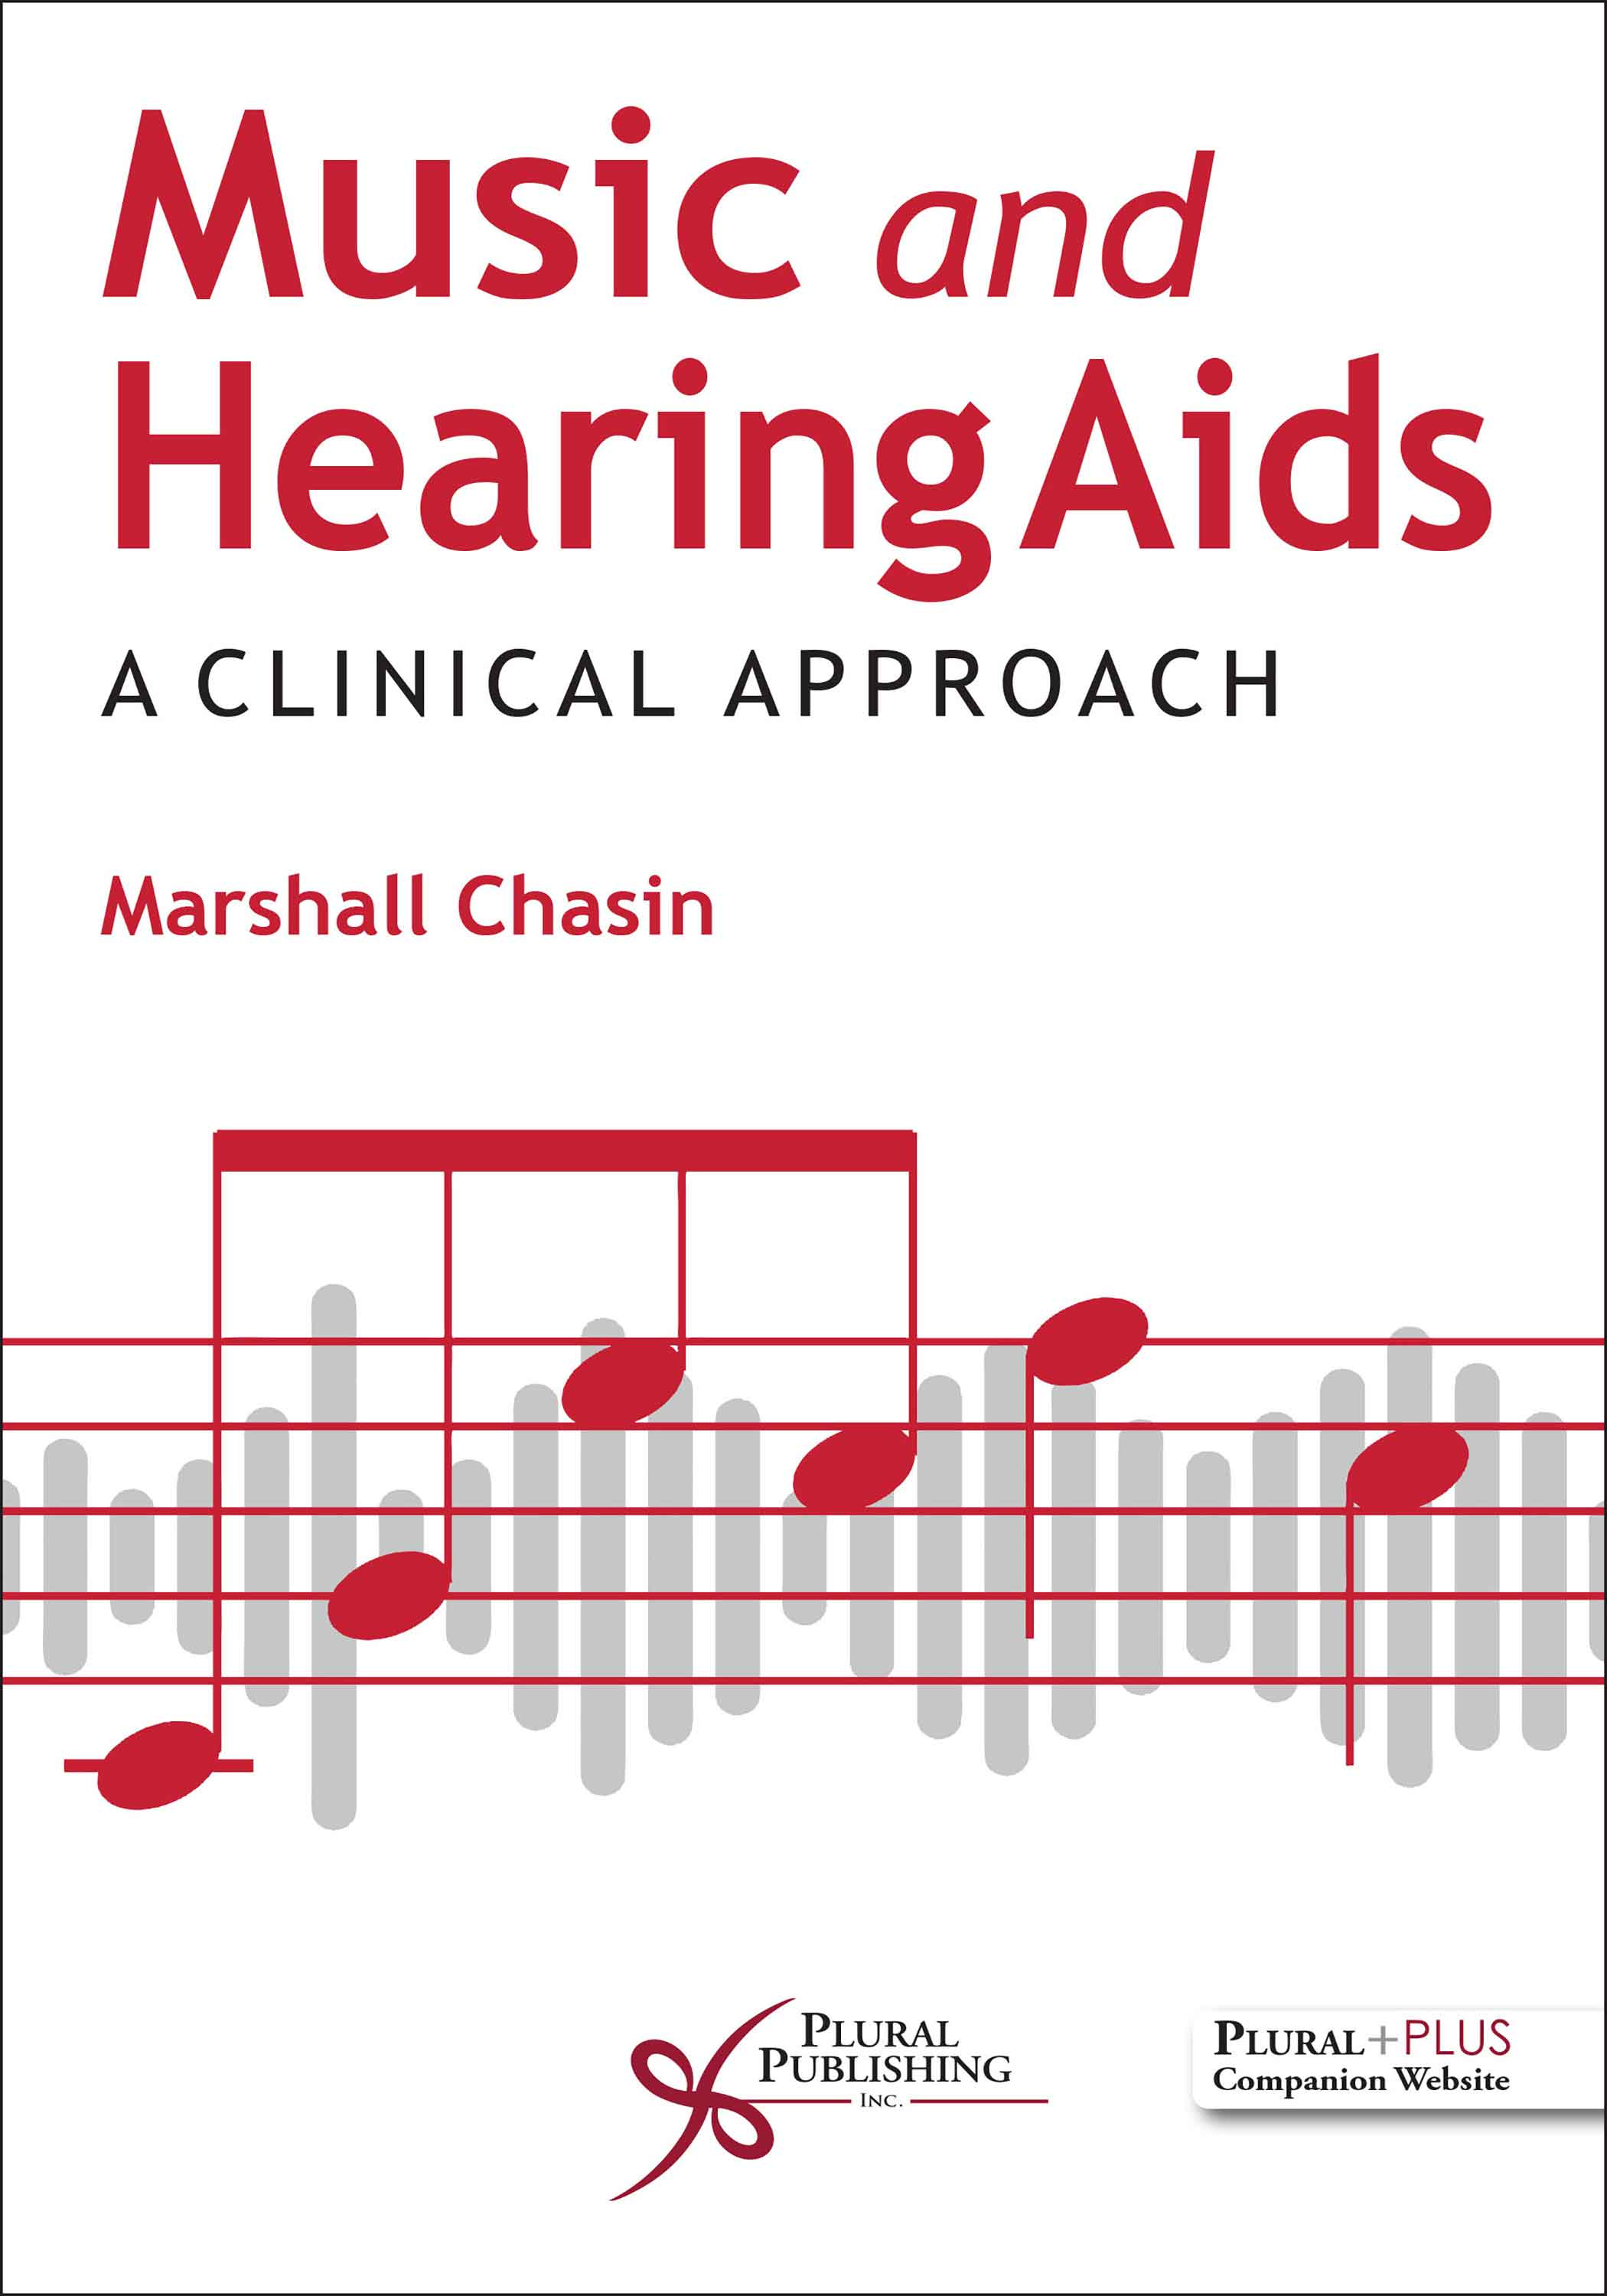 Music and hearing aids book cover